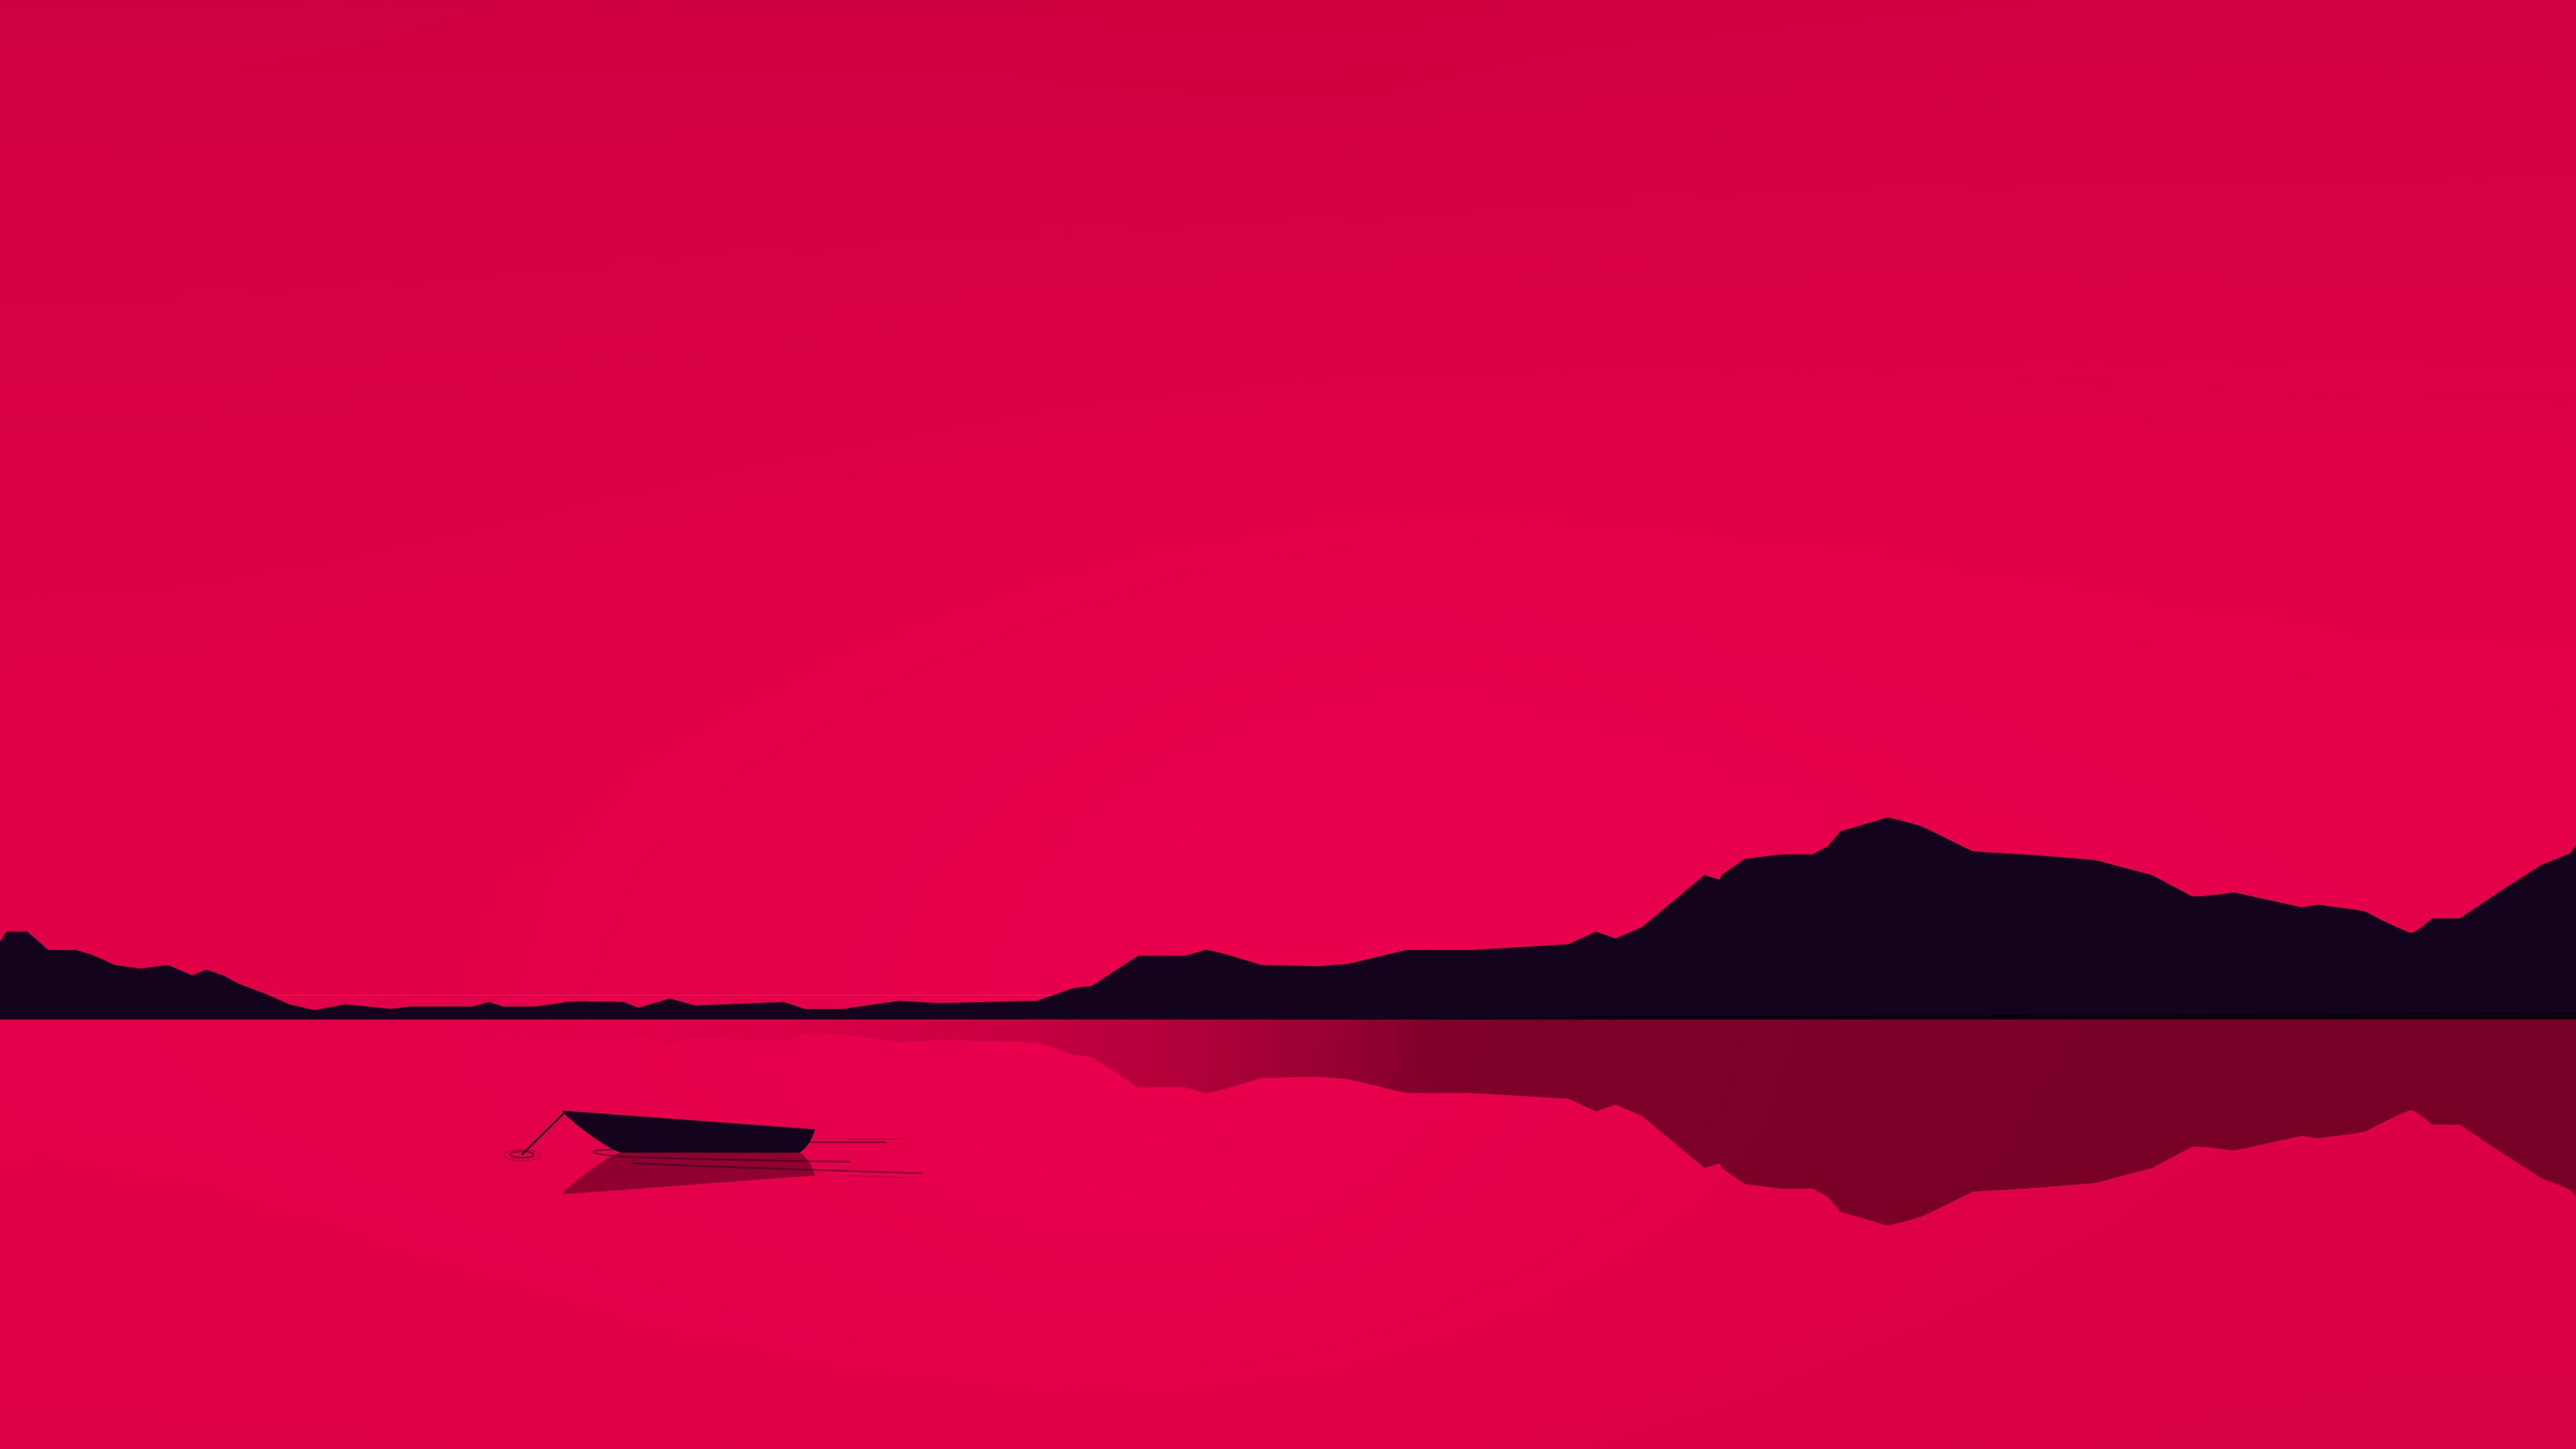 Lake Minimal Red 4k, HD Artist, 4k Wallpaper, Image, Background, Photo and Picture